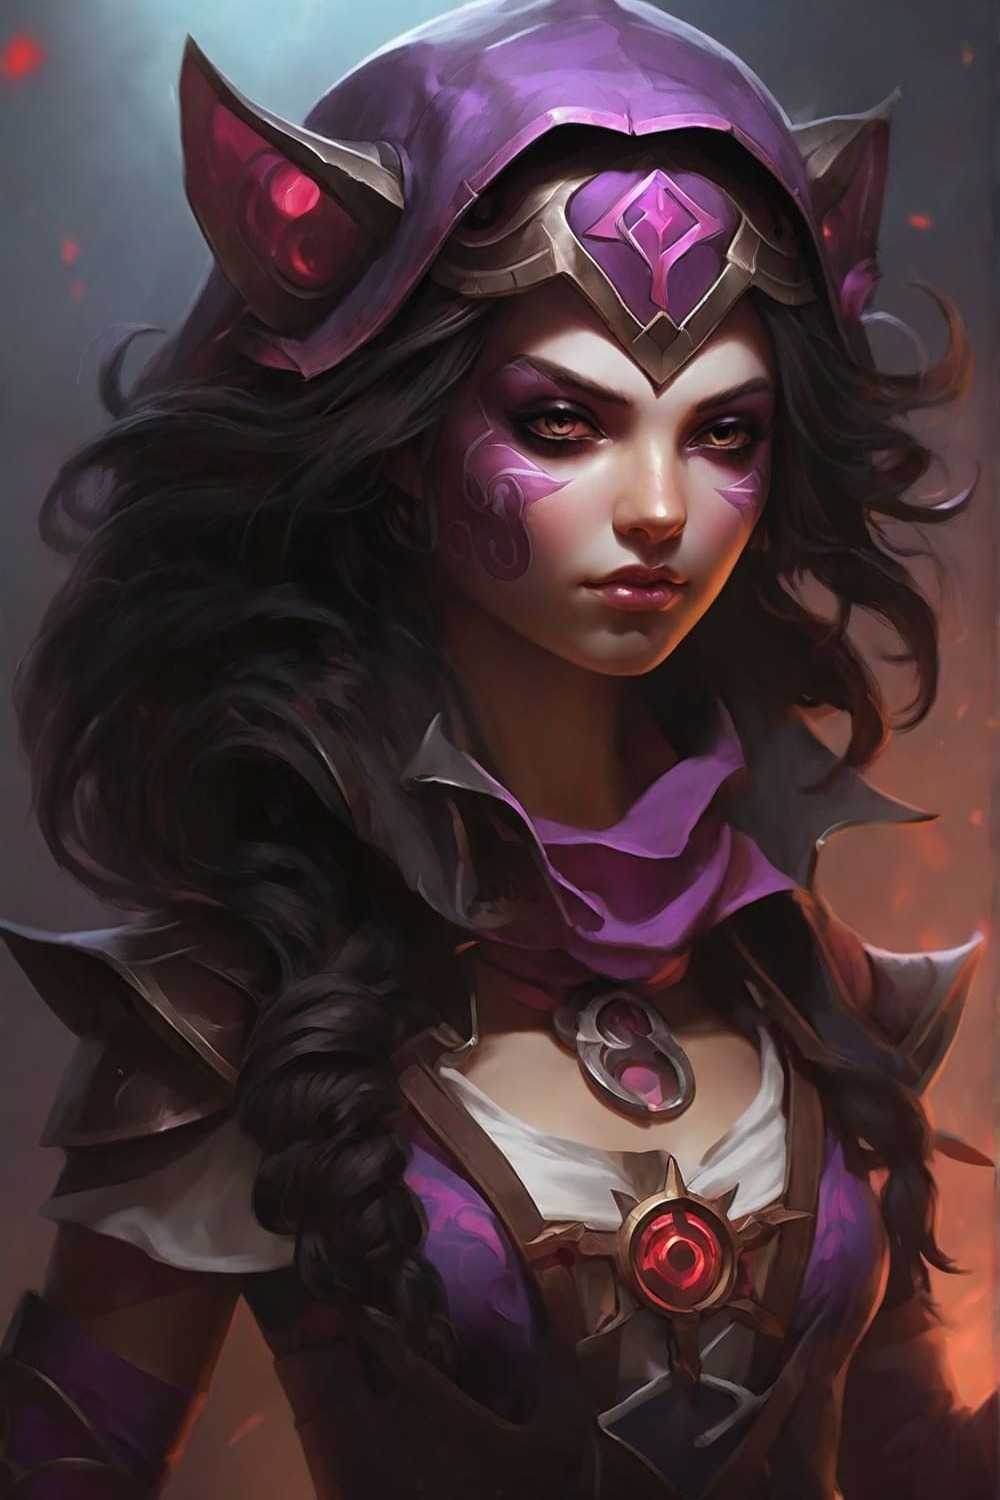 templar assassin, fairy tale character, girl knight pinterest preview image.